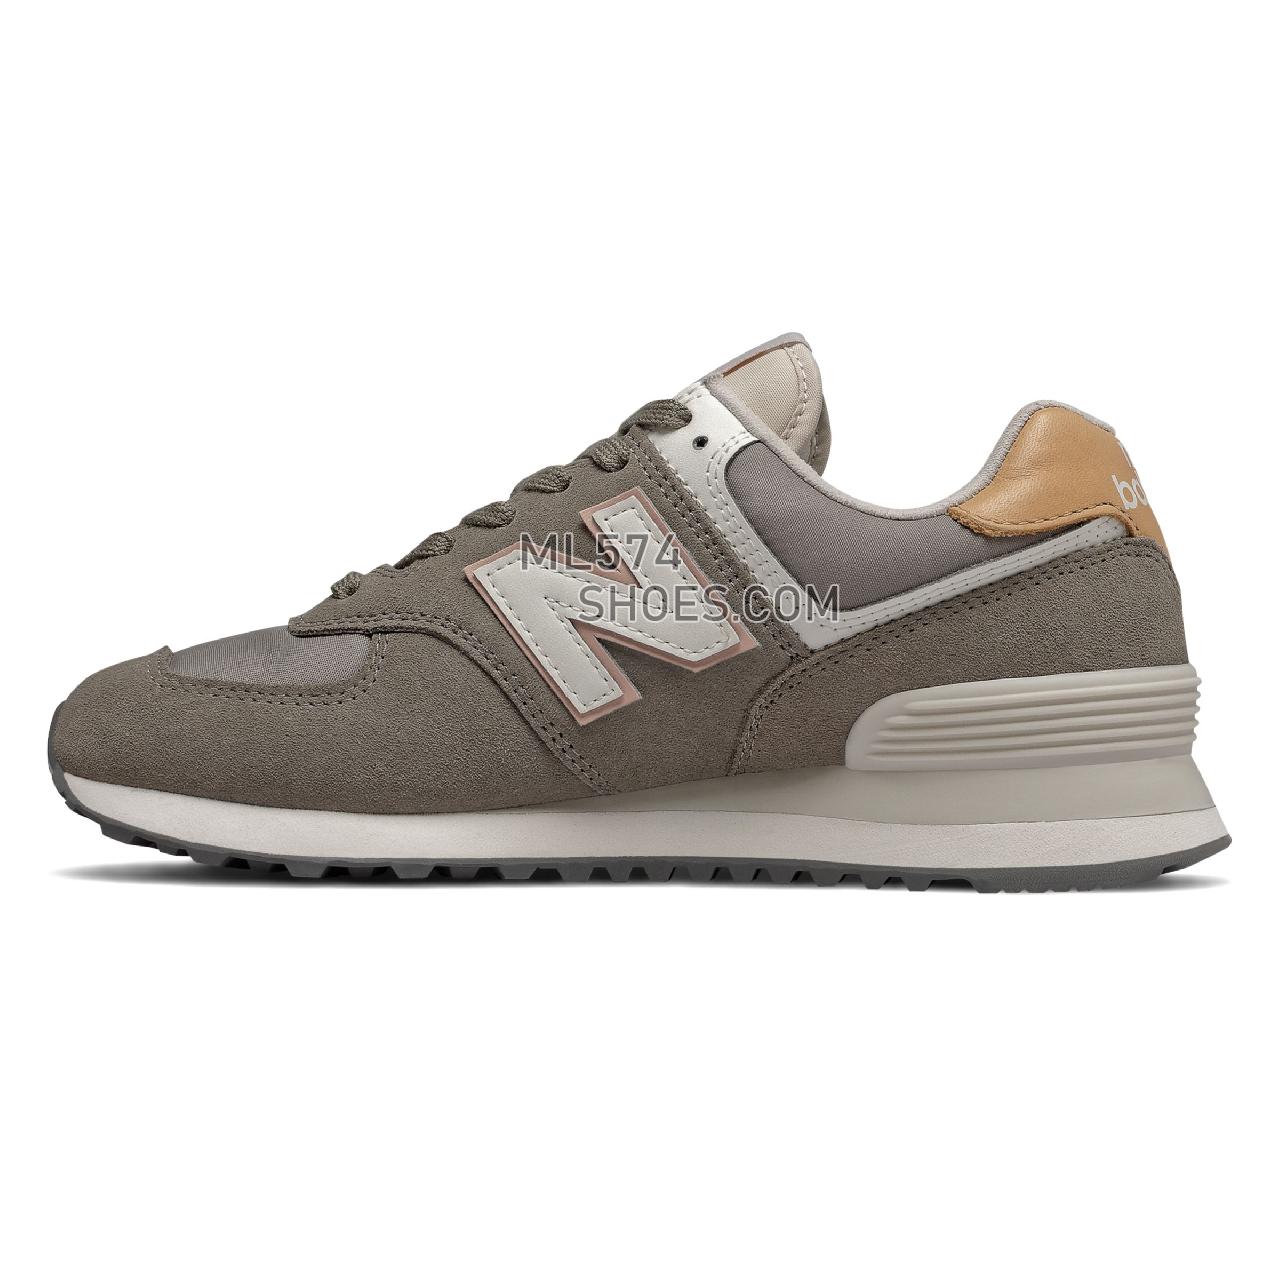 New Balance 574 - Women's Classic Sneakers - Earth with Warm Alpaca - WL574SYL